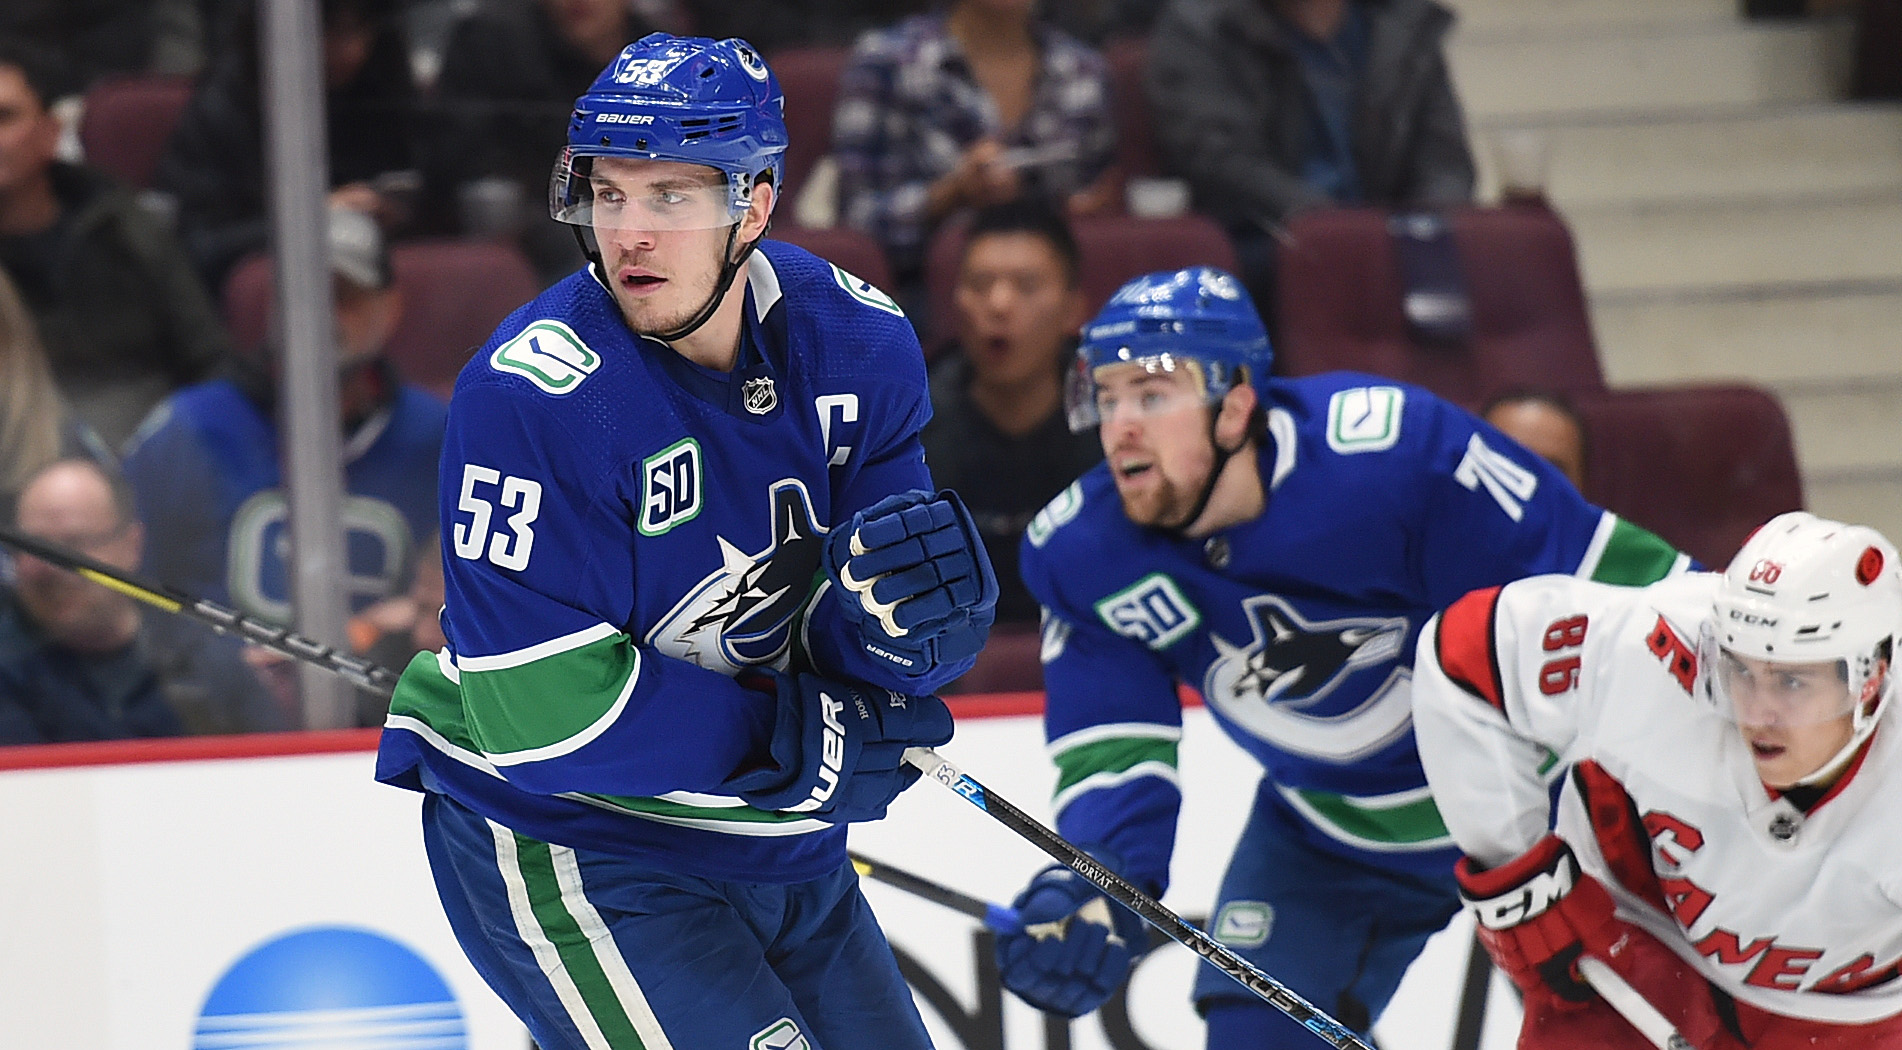 Canucks: The Bo Horvat trade changed the franchise's direction